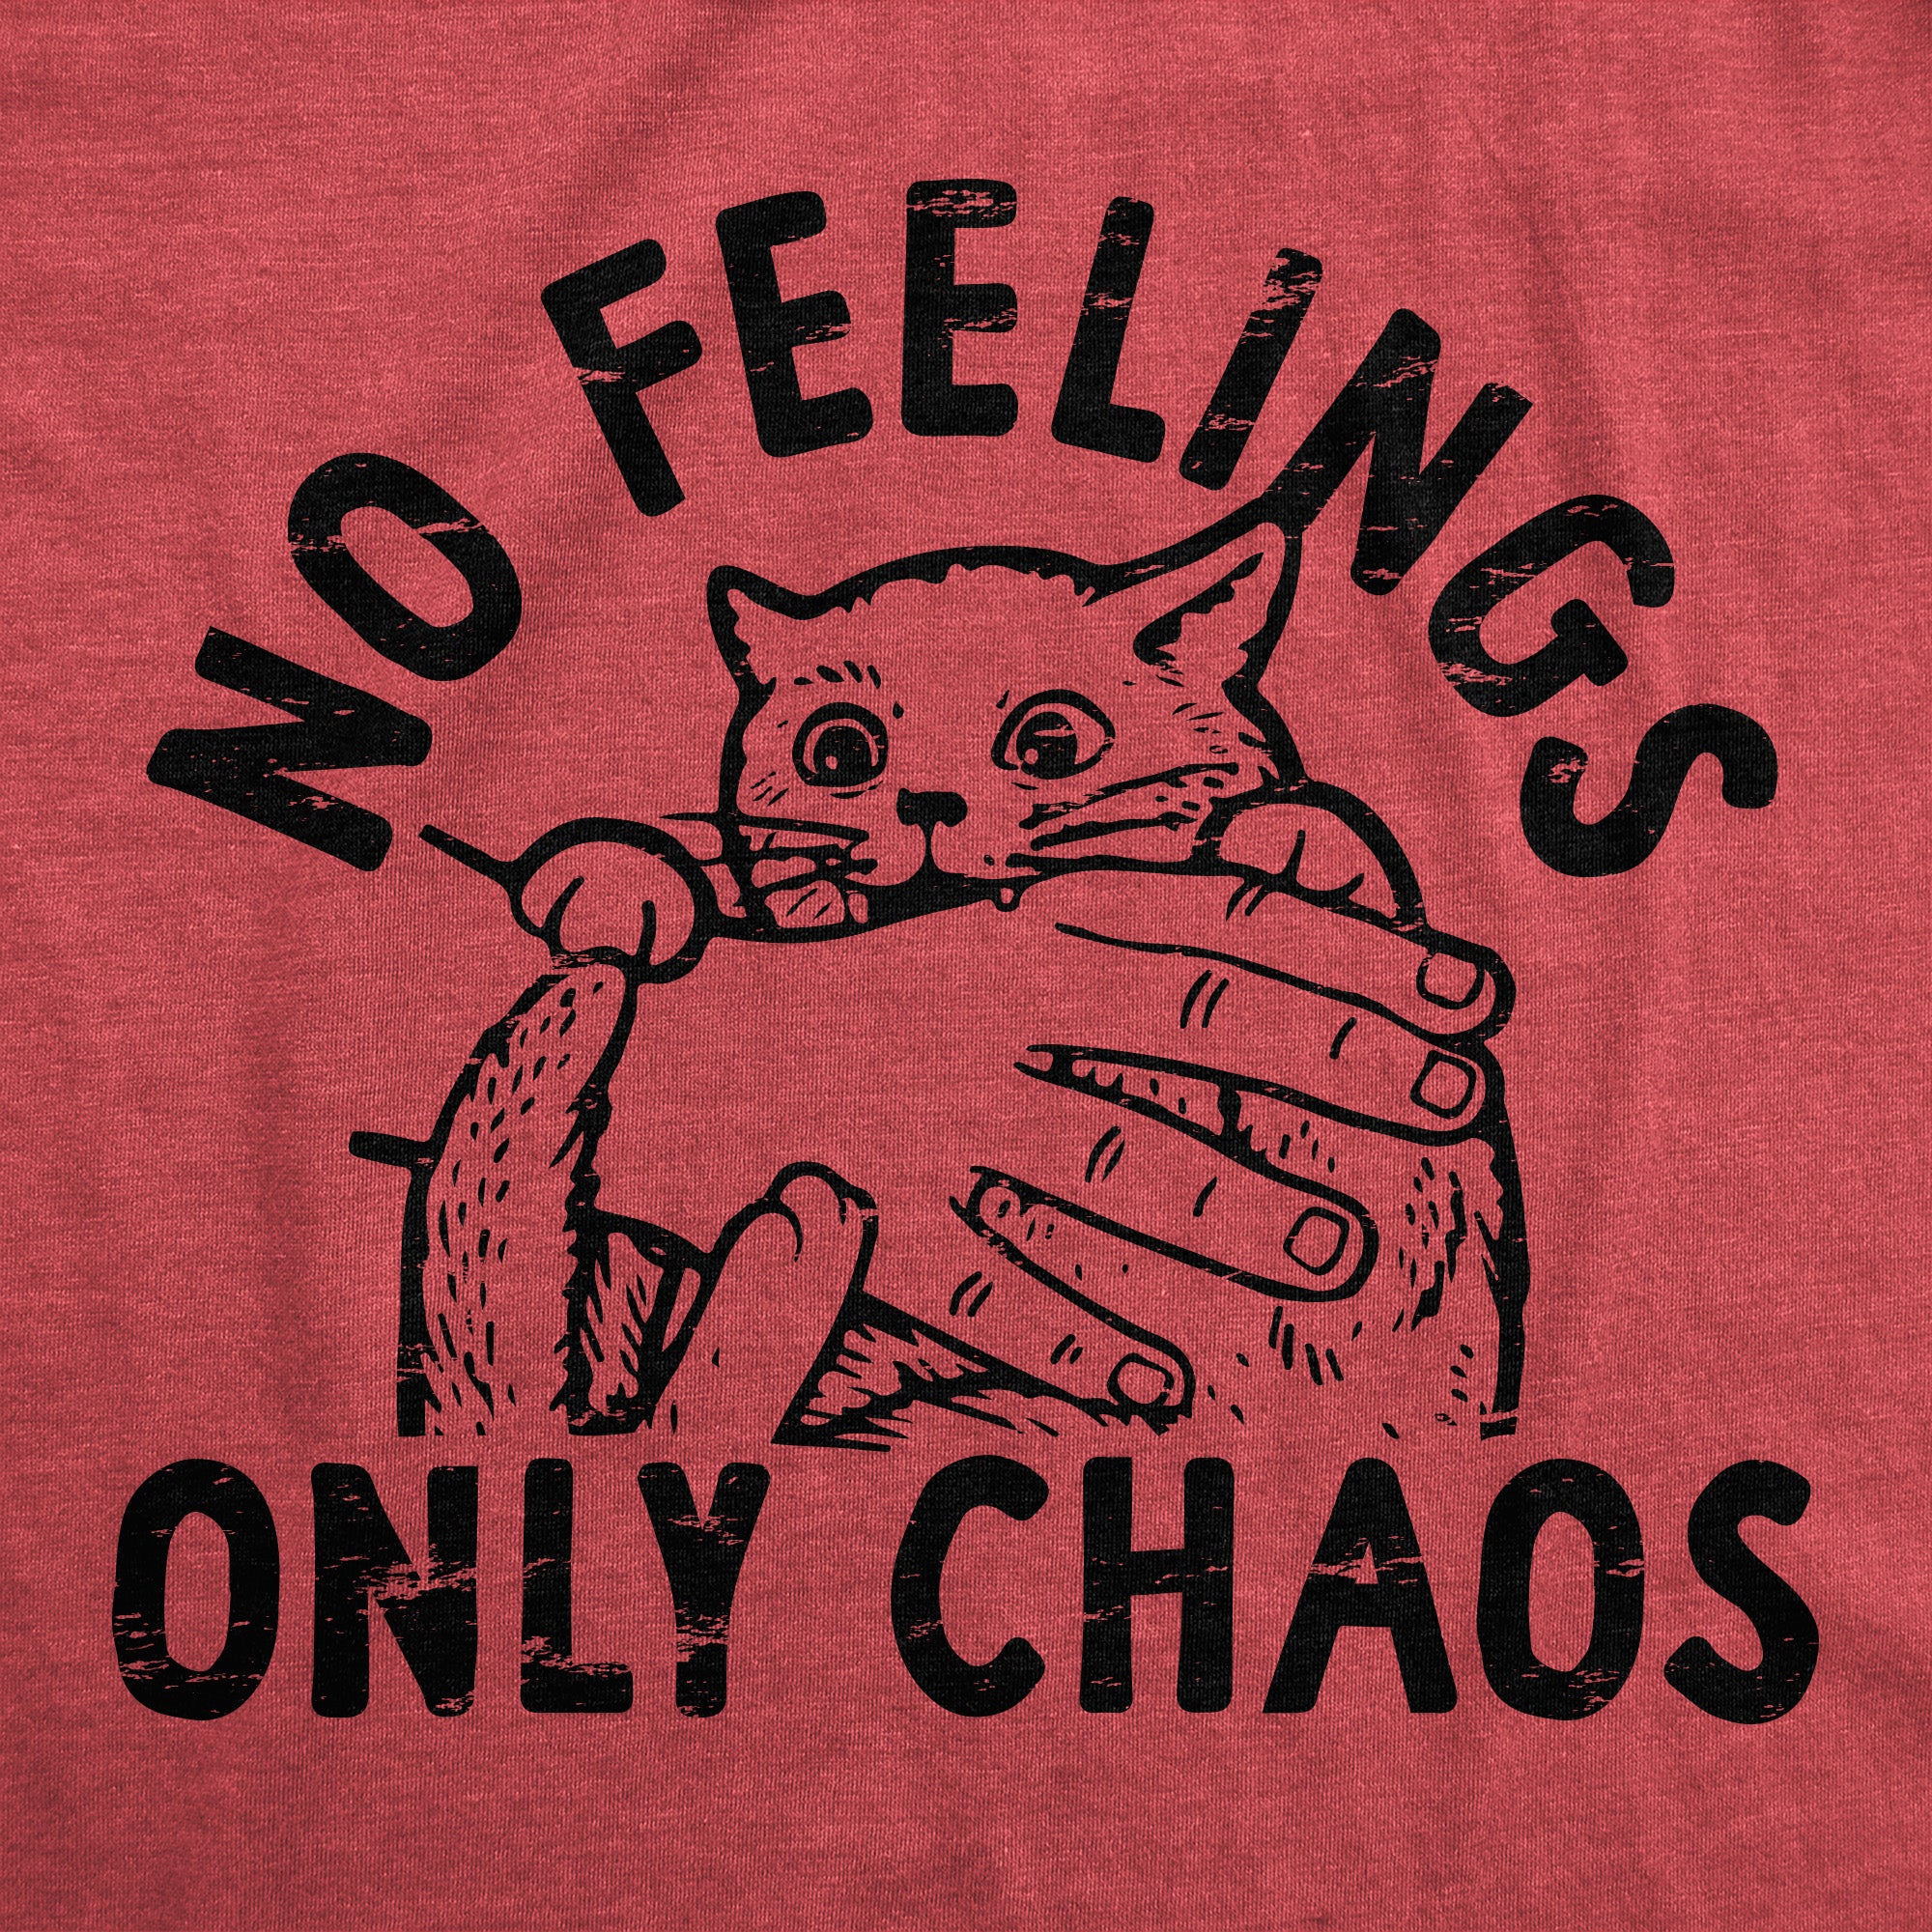 Funny Heather Red - CHAOS No Feelings Only Chaos Womens T Shirt Nerdy Cat sarcastic Tee